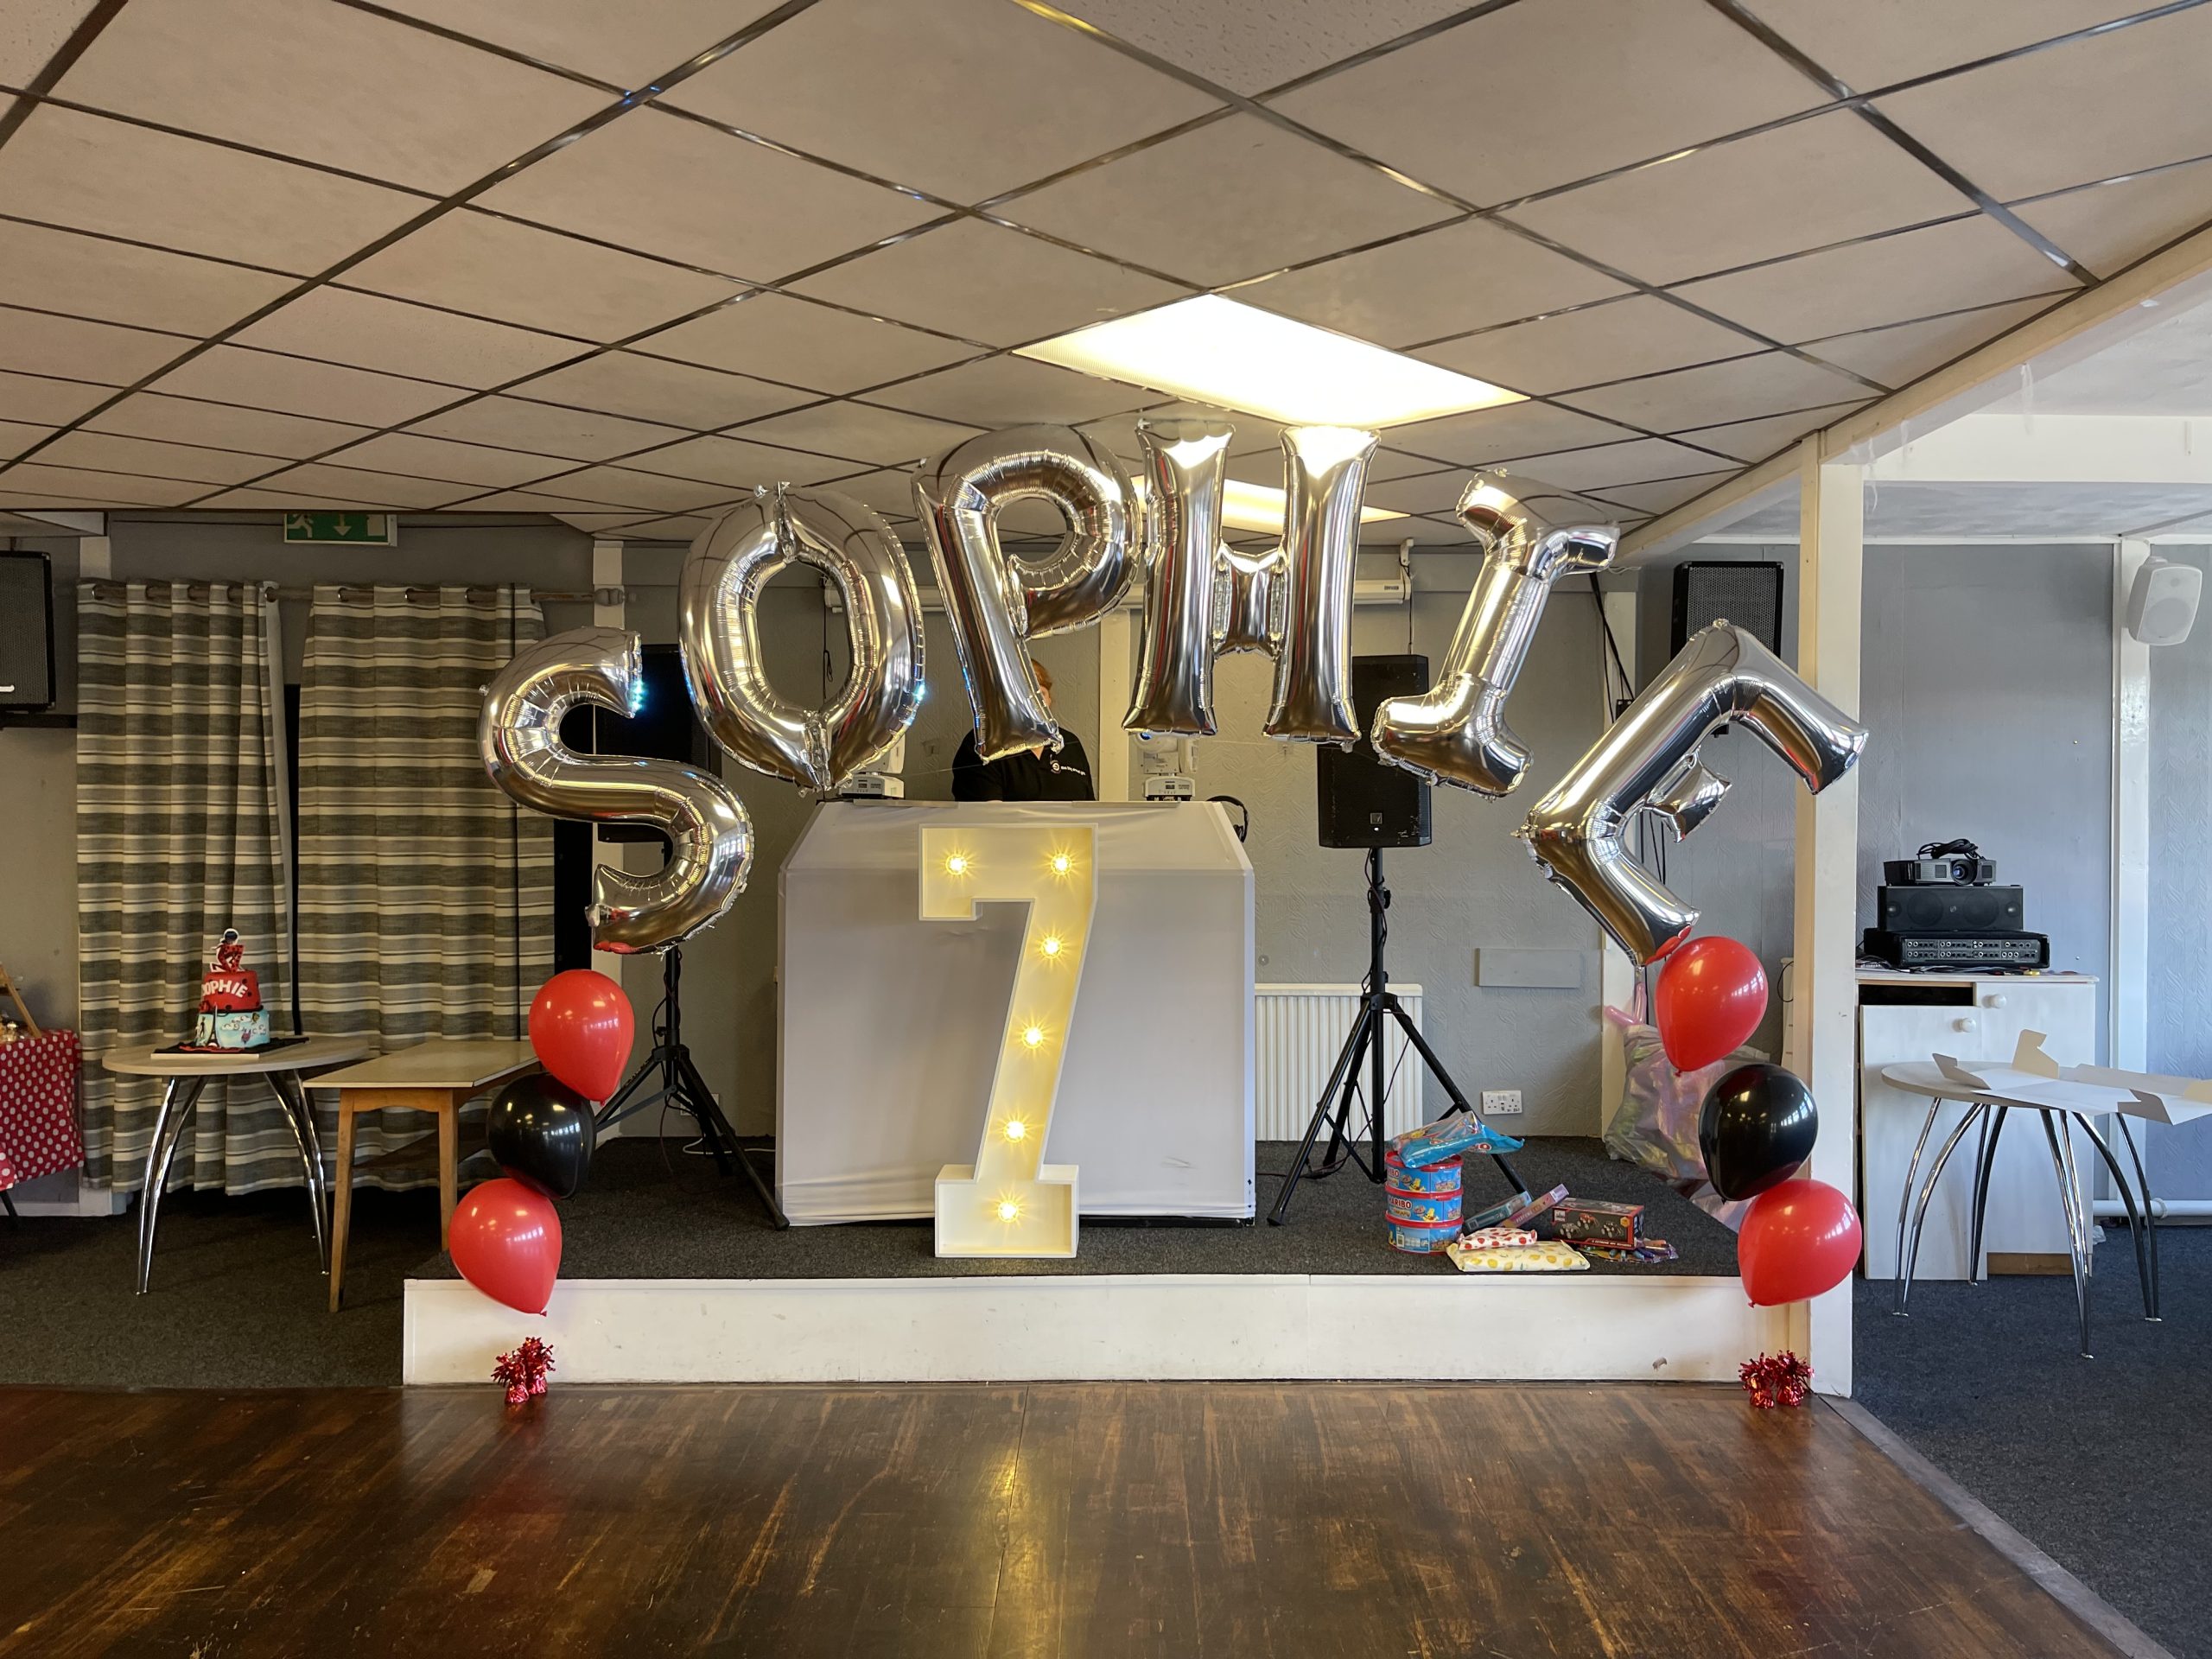 Balloon display with foil letters spelling a children's birthday name